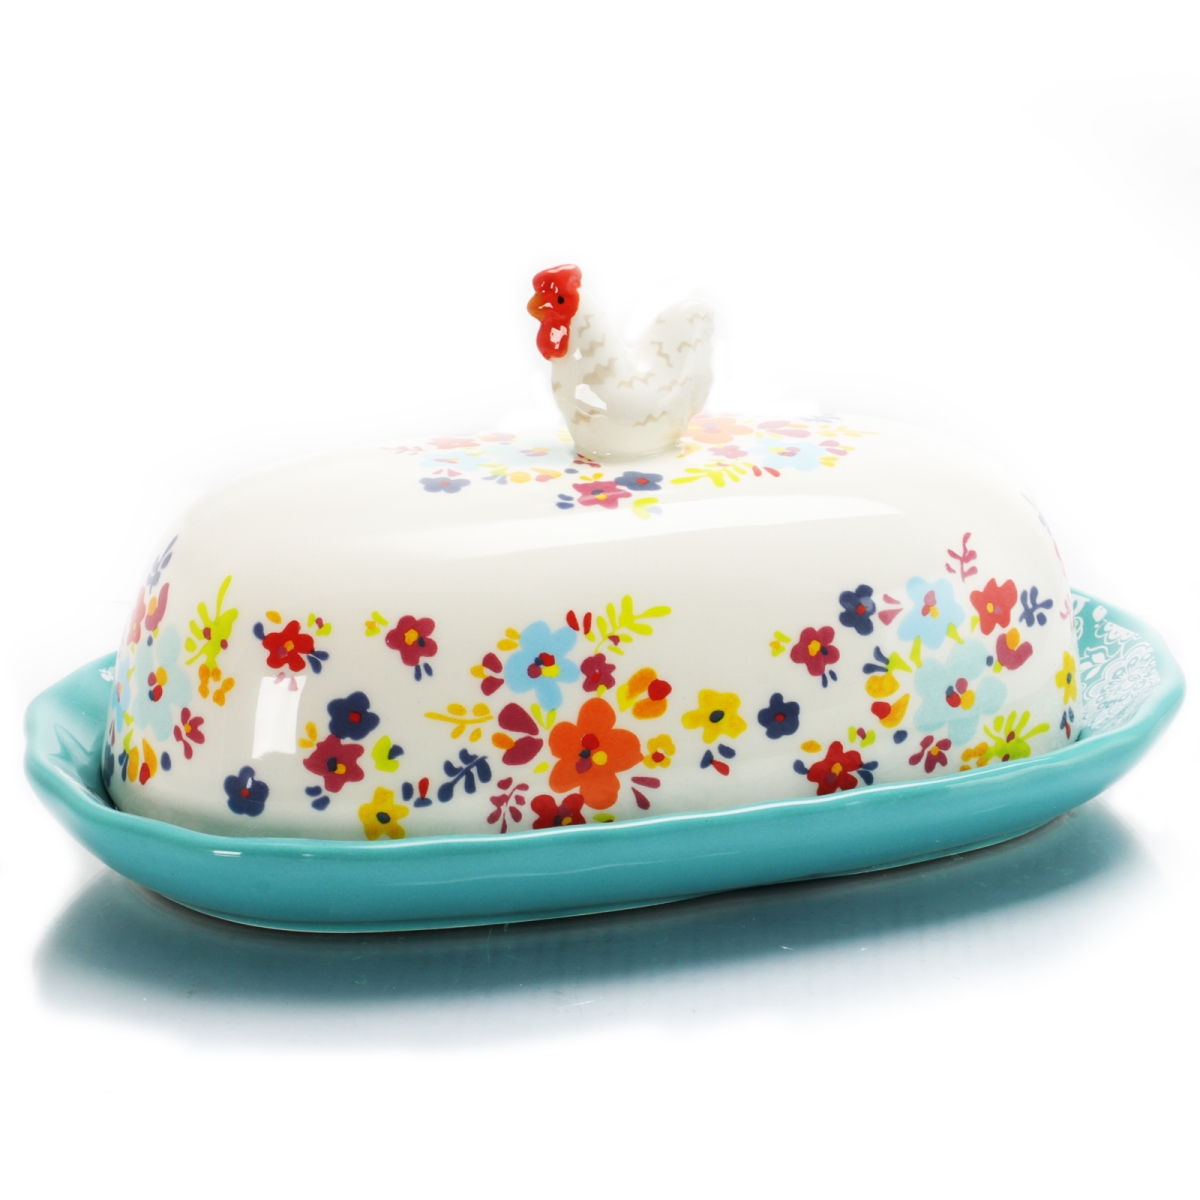 123222.02 8.75 In. Life On The Farm Ceramic Figural Rooster Butter Dish In Teal & Floral